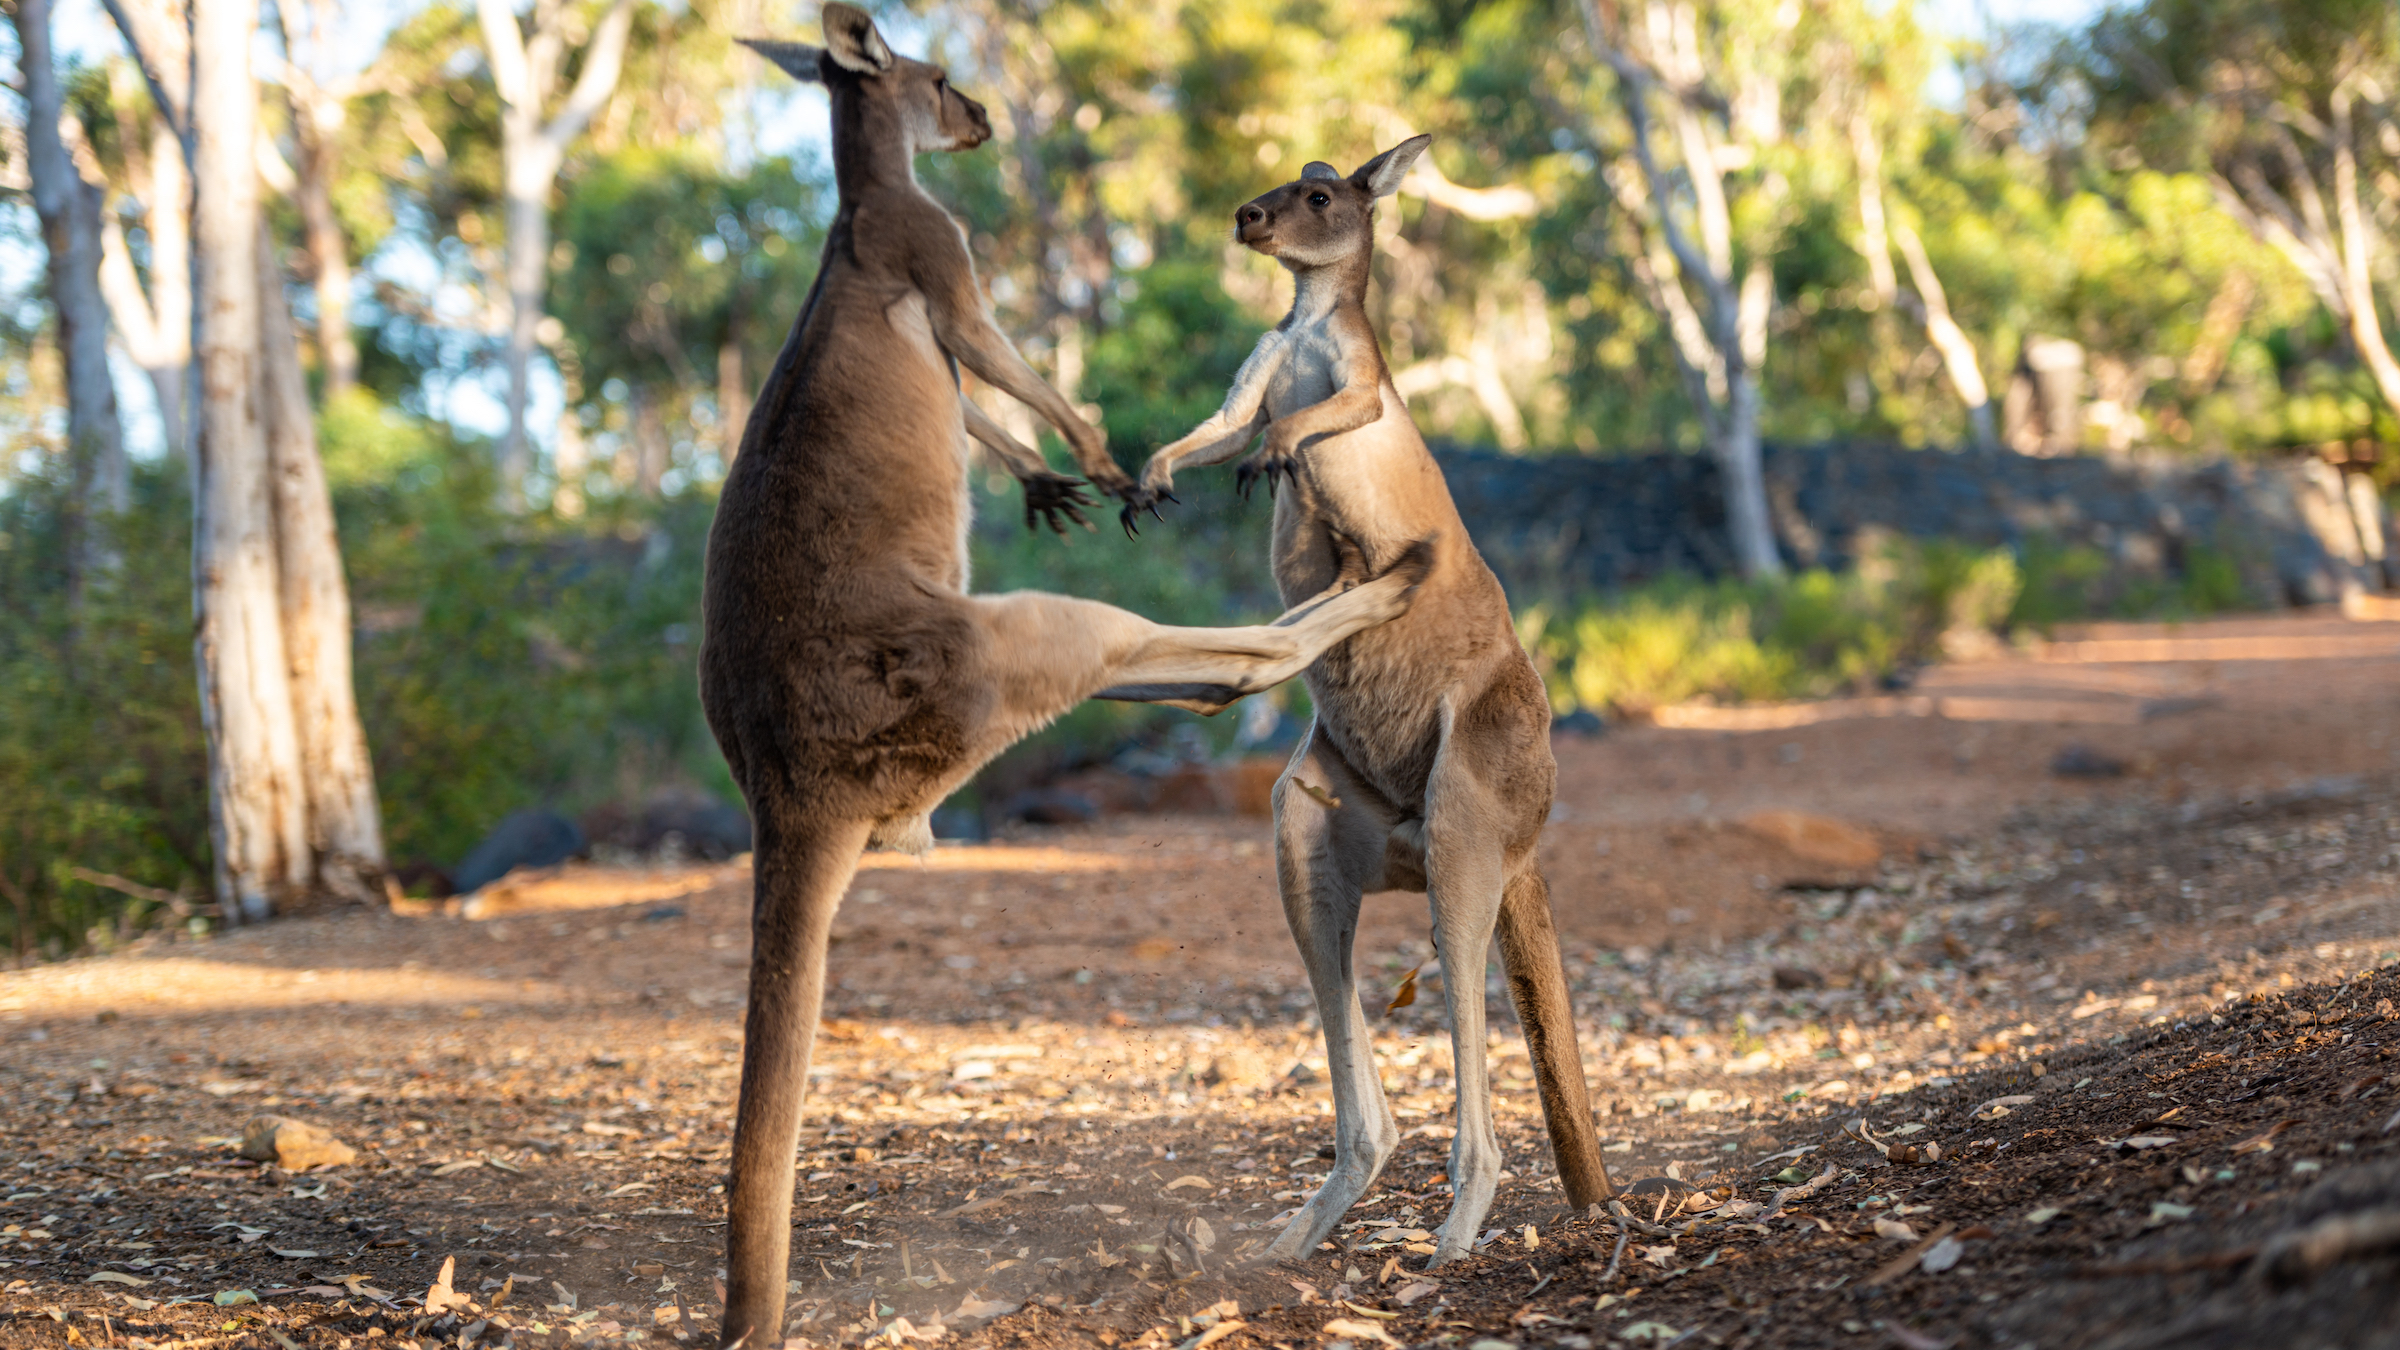 A western gray kangaroo (Macropus fuliginosus) does a footbox while standing on its tail in John Forest National Park, Perth, Western Australia.